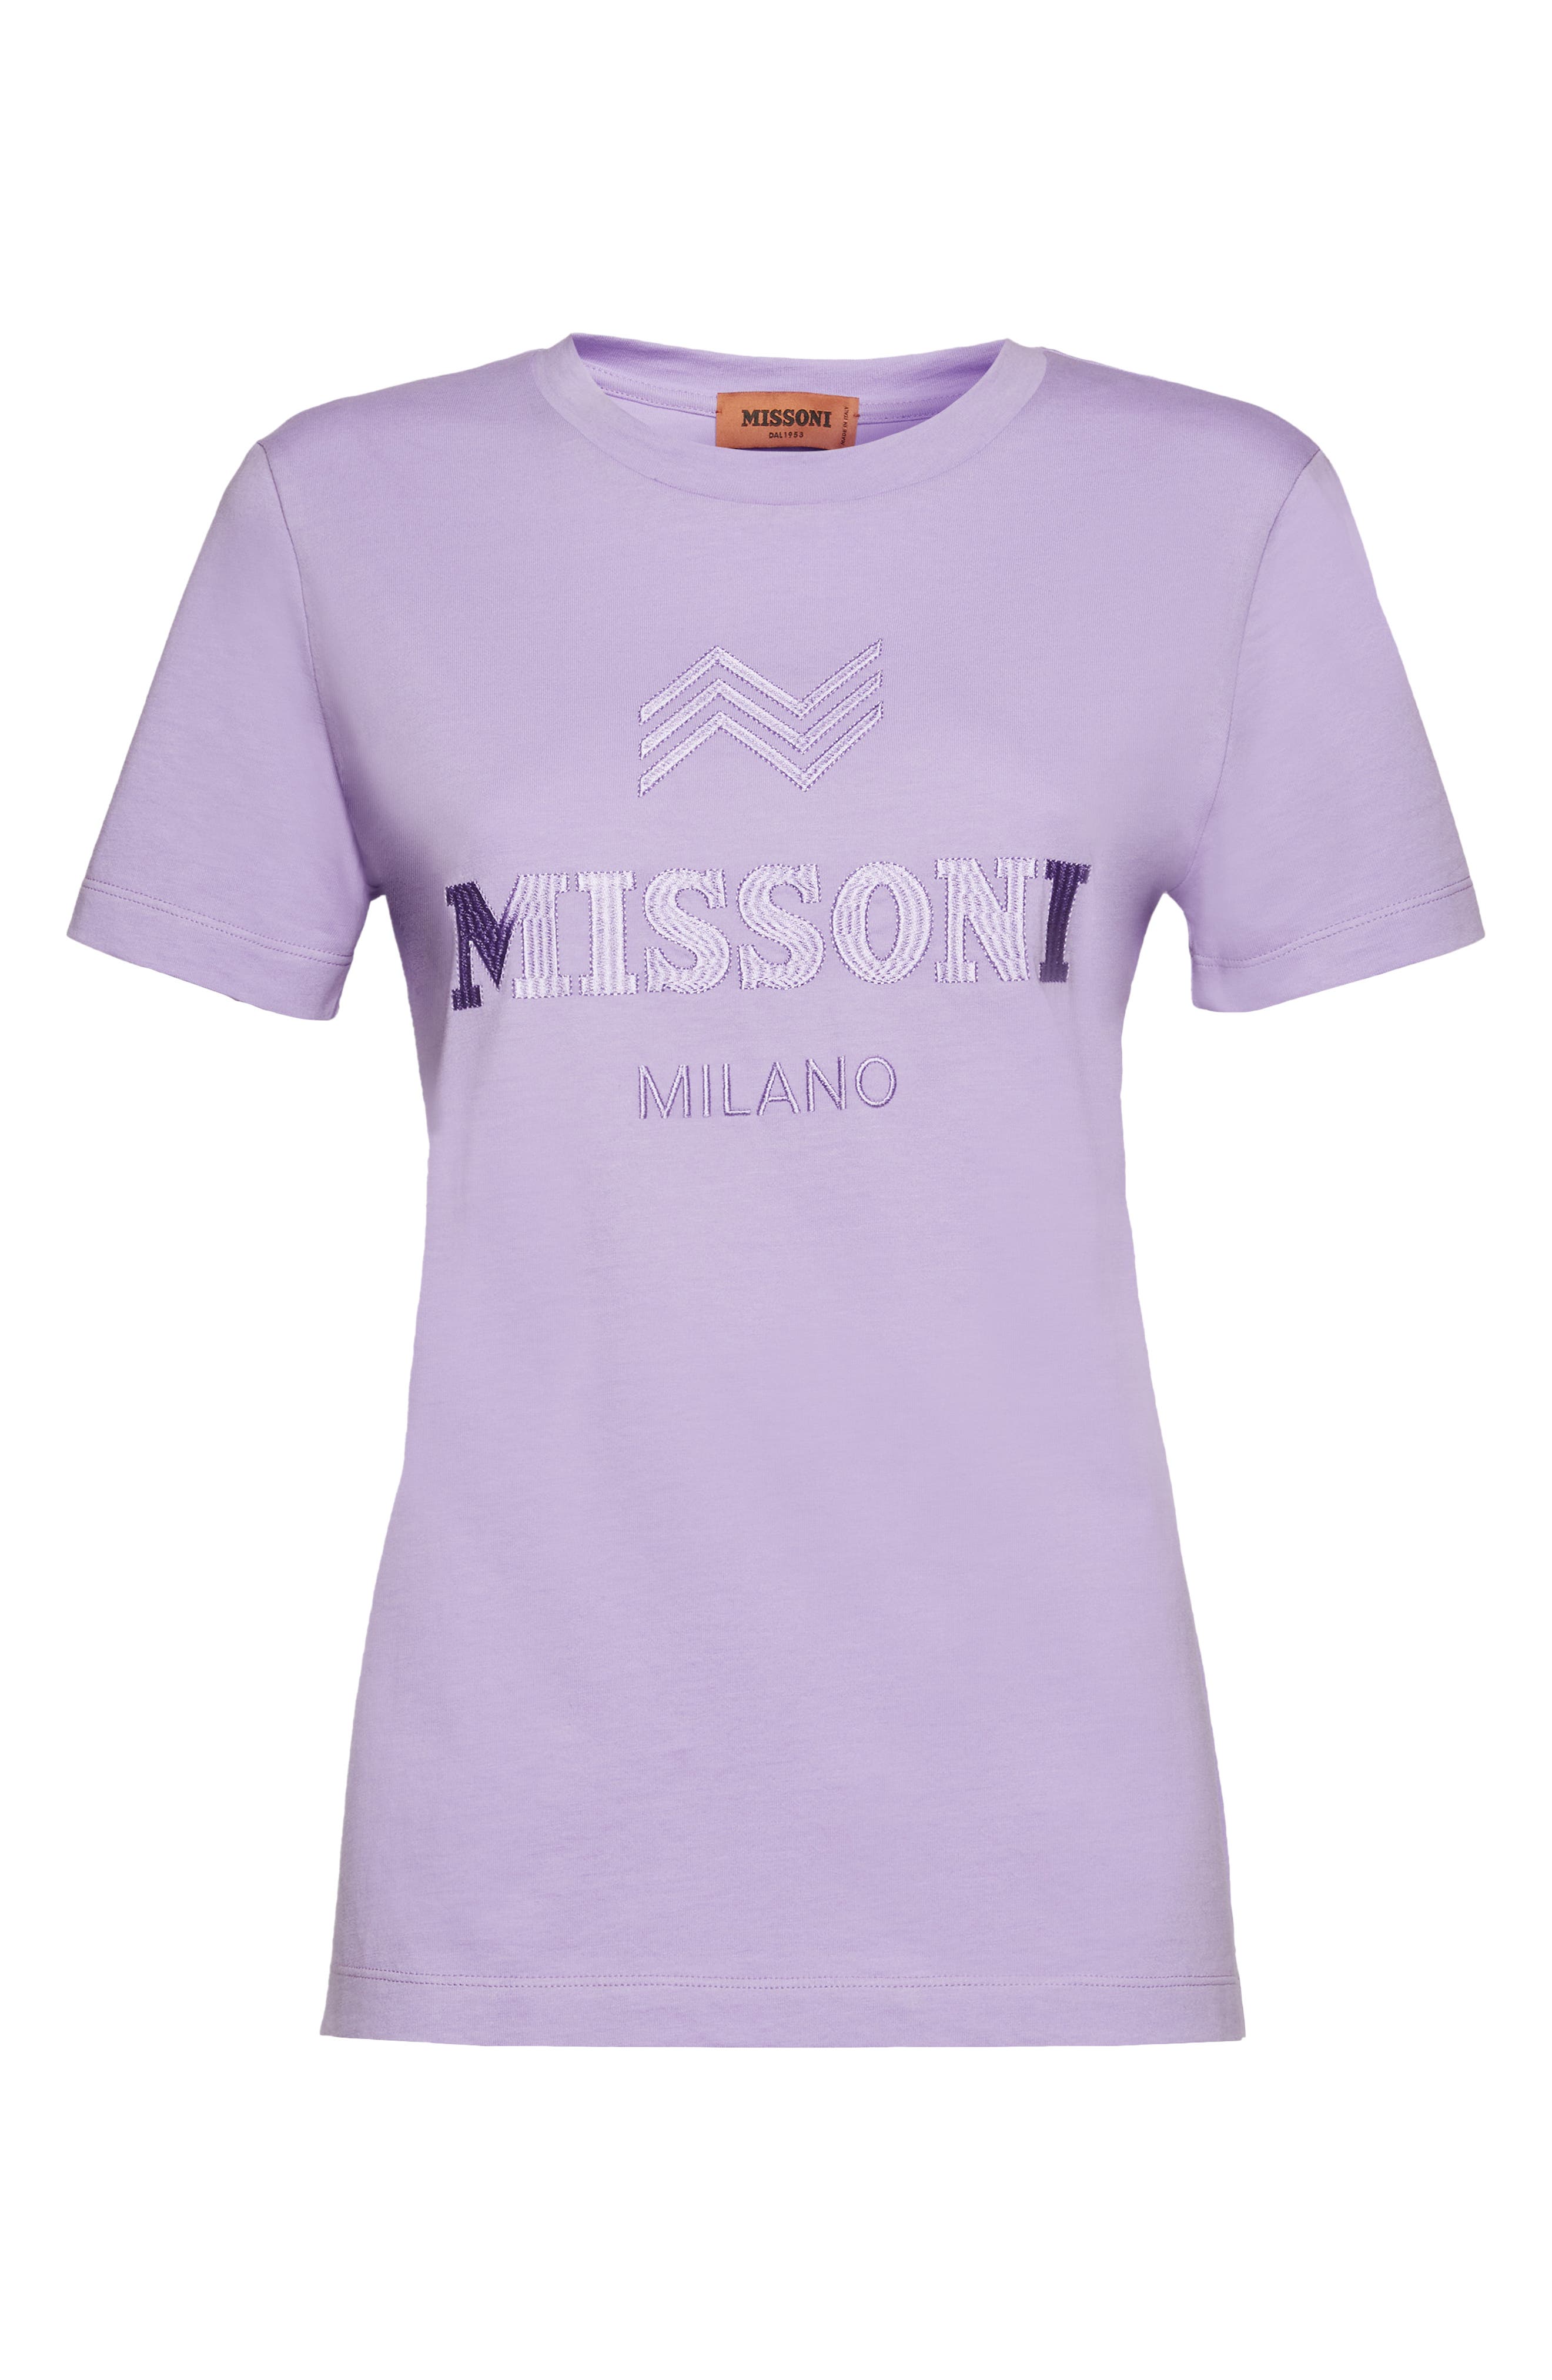 Missoni Logo Graphic Tee in Sand Verbena at Nordstrom, Size X-Small